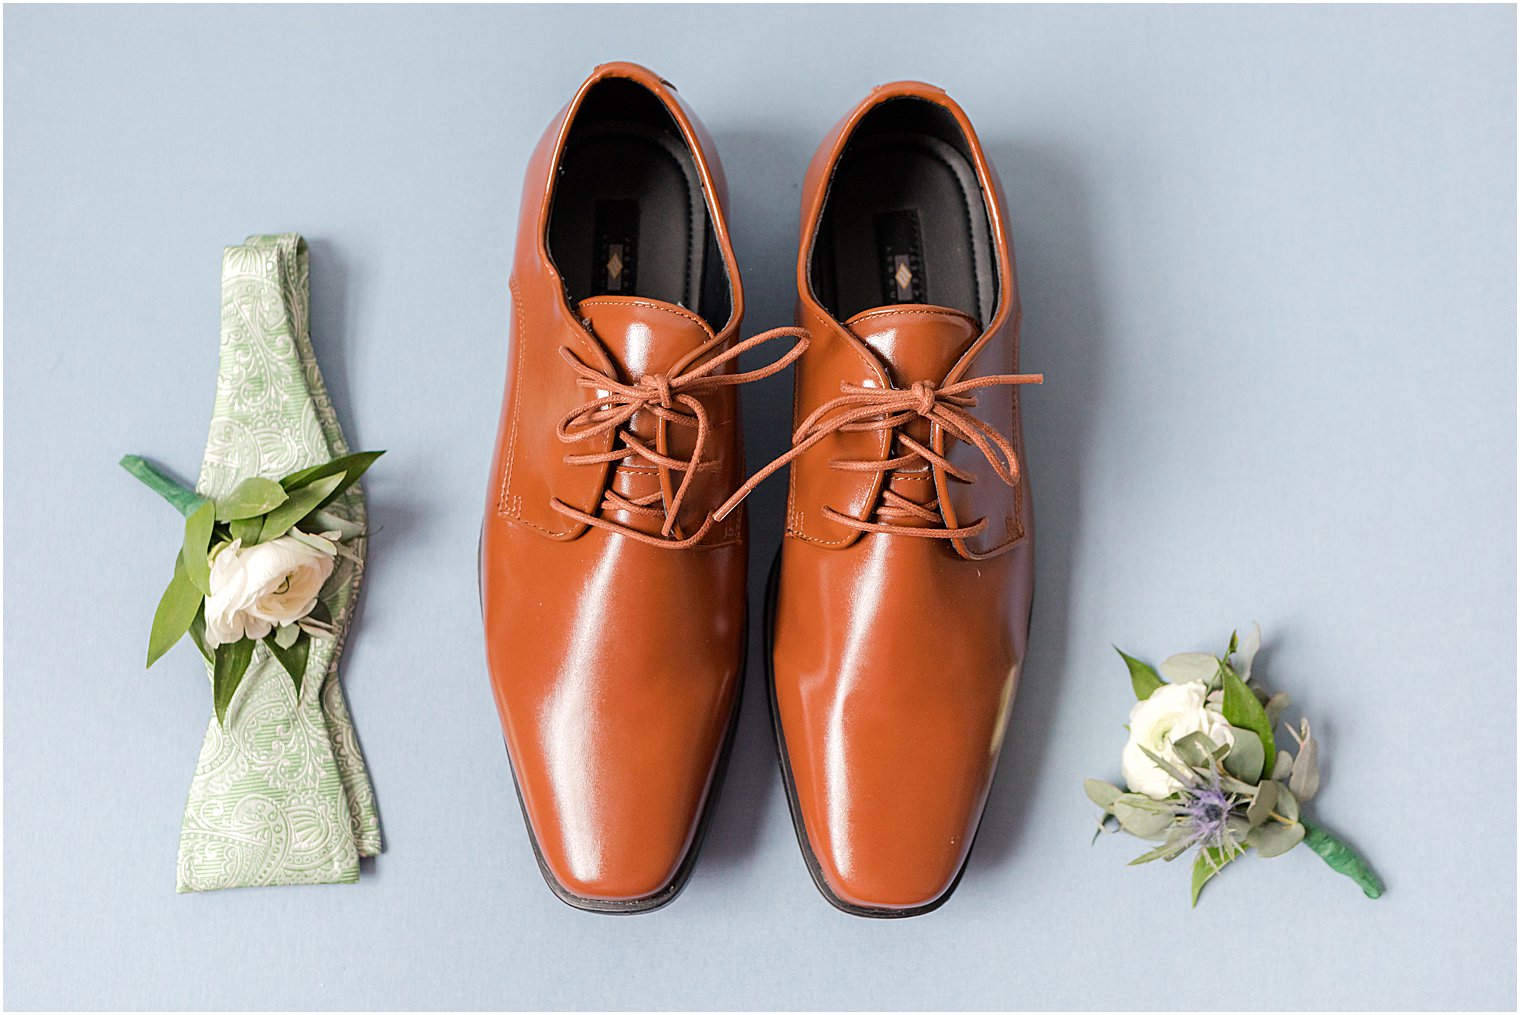 groom's brown shoes and floral boutonnières